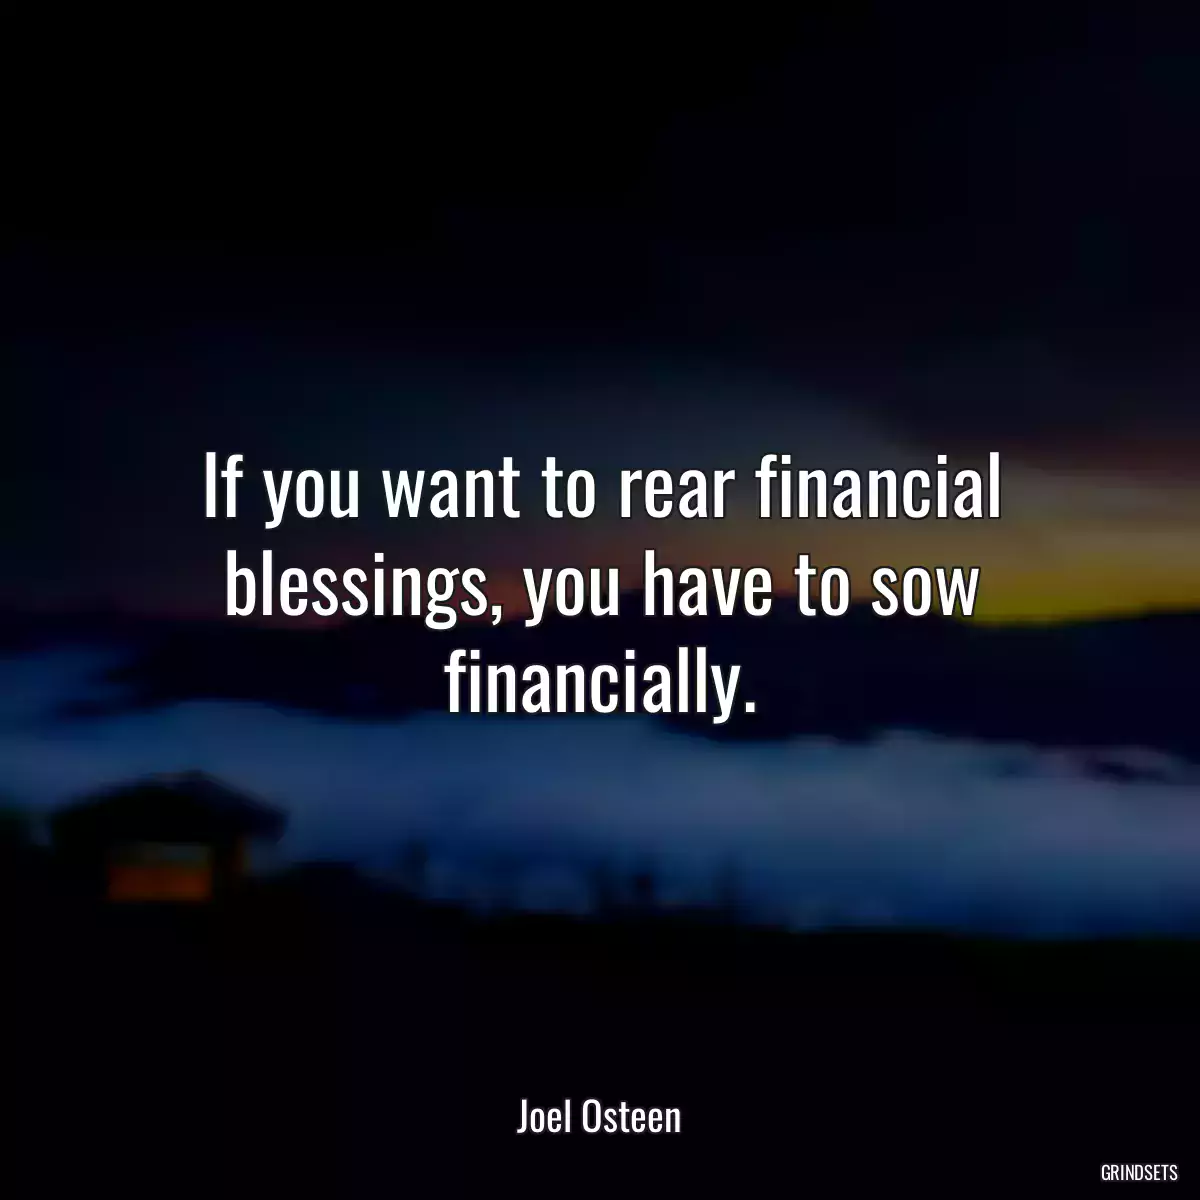 If you want to rear financial blessings, you have to sow financially.